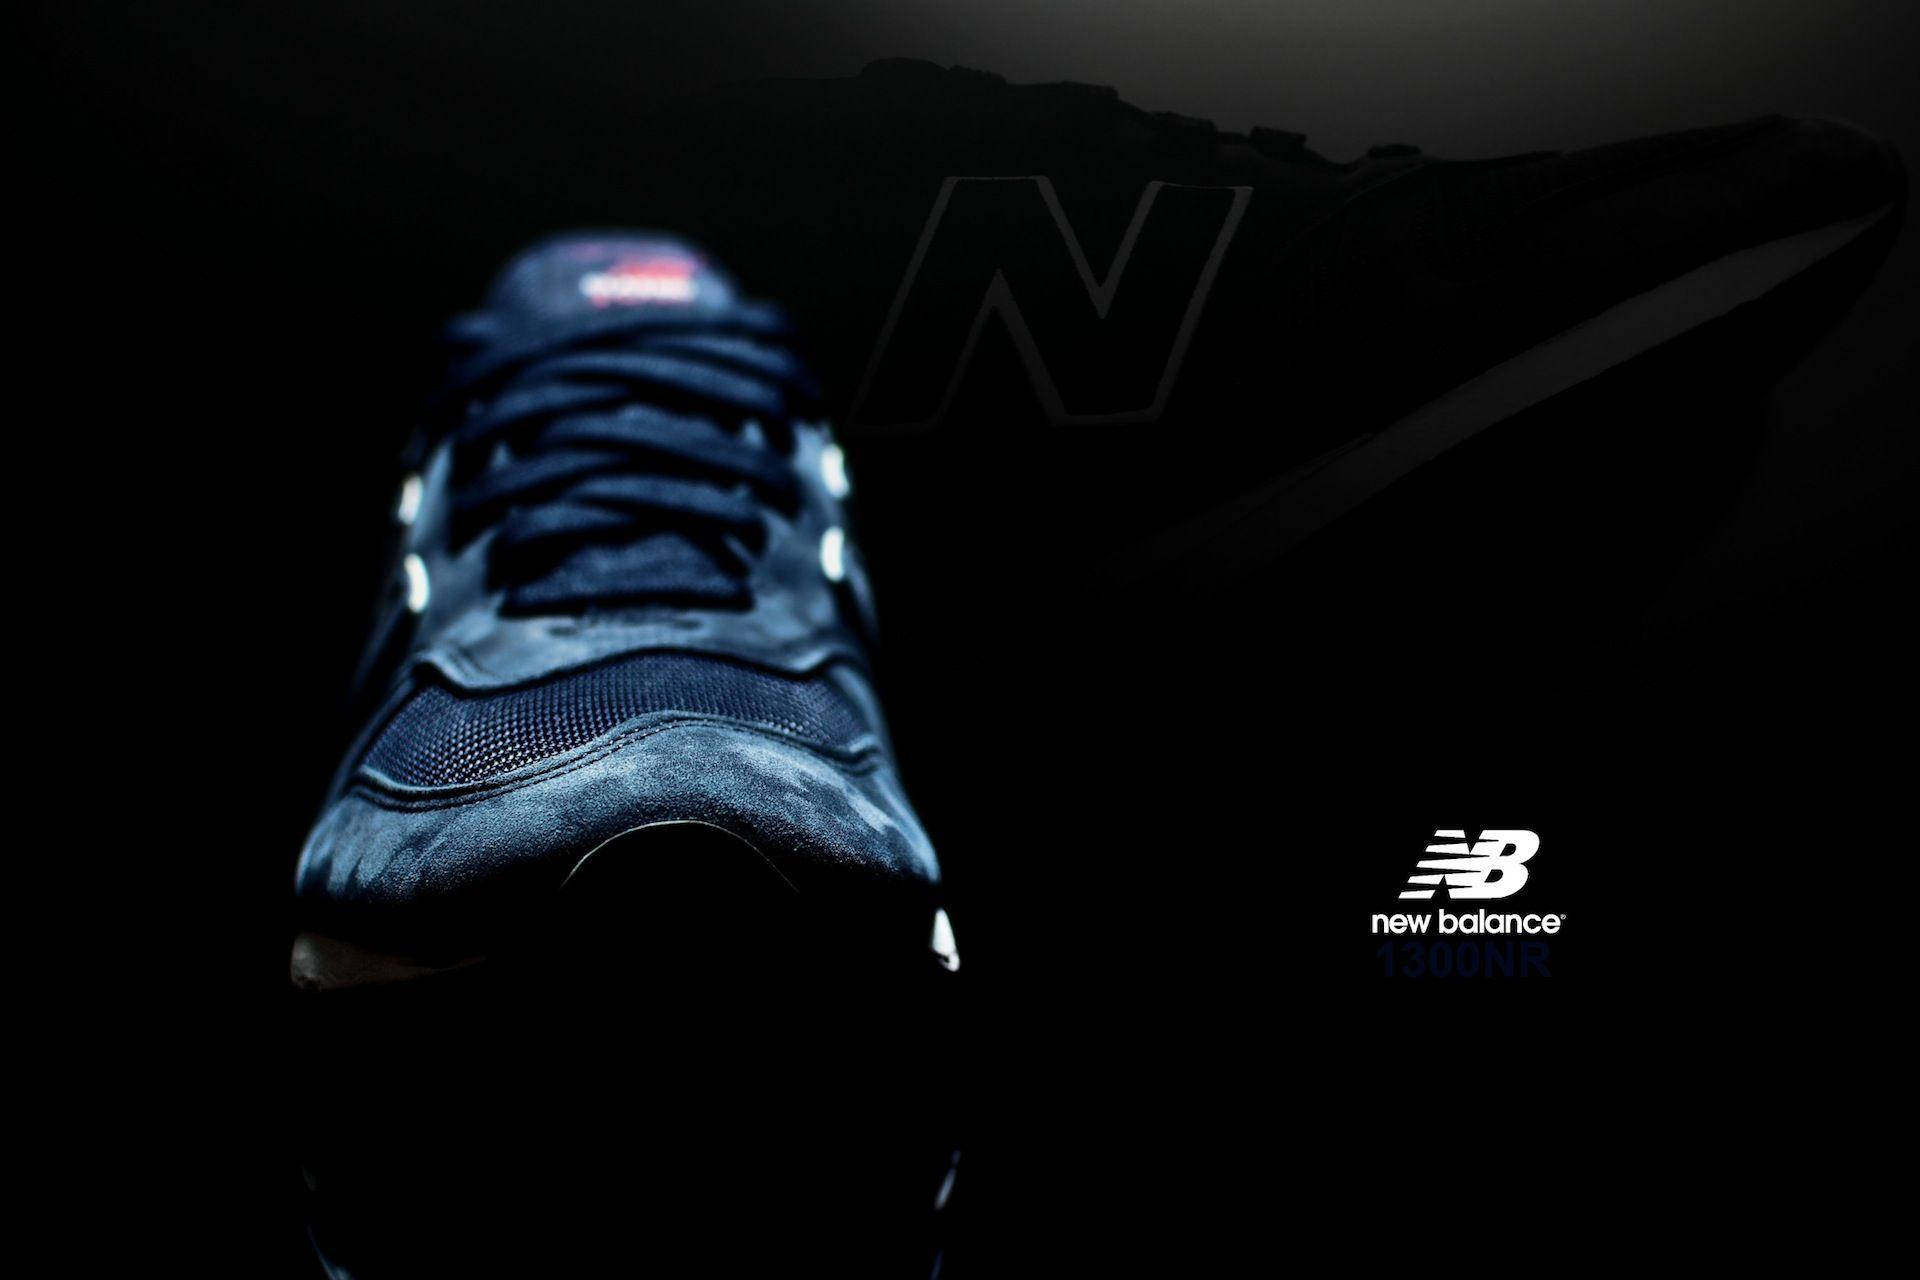 New Balance wallpaper by LordCiege  Download on ZEDGE  5f88